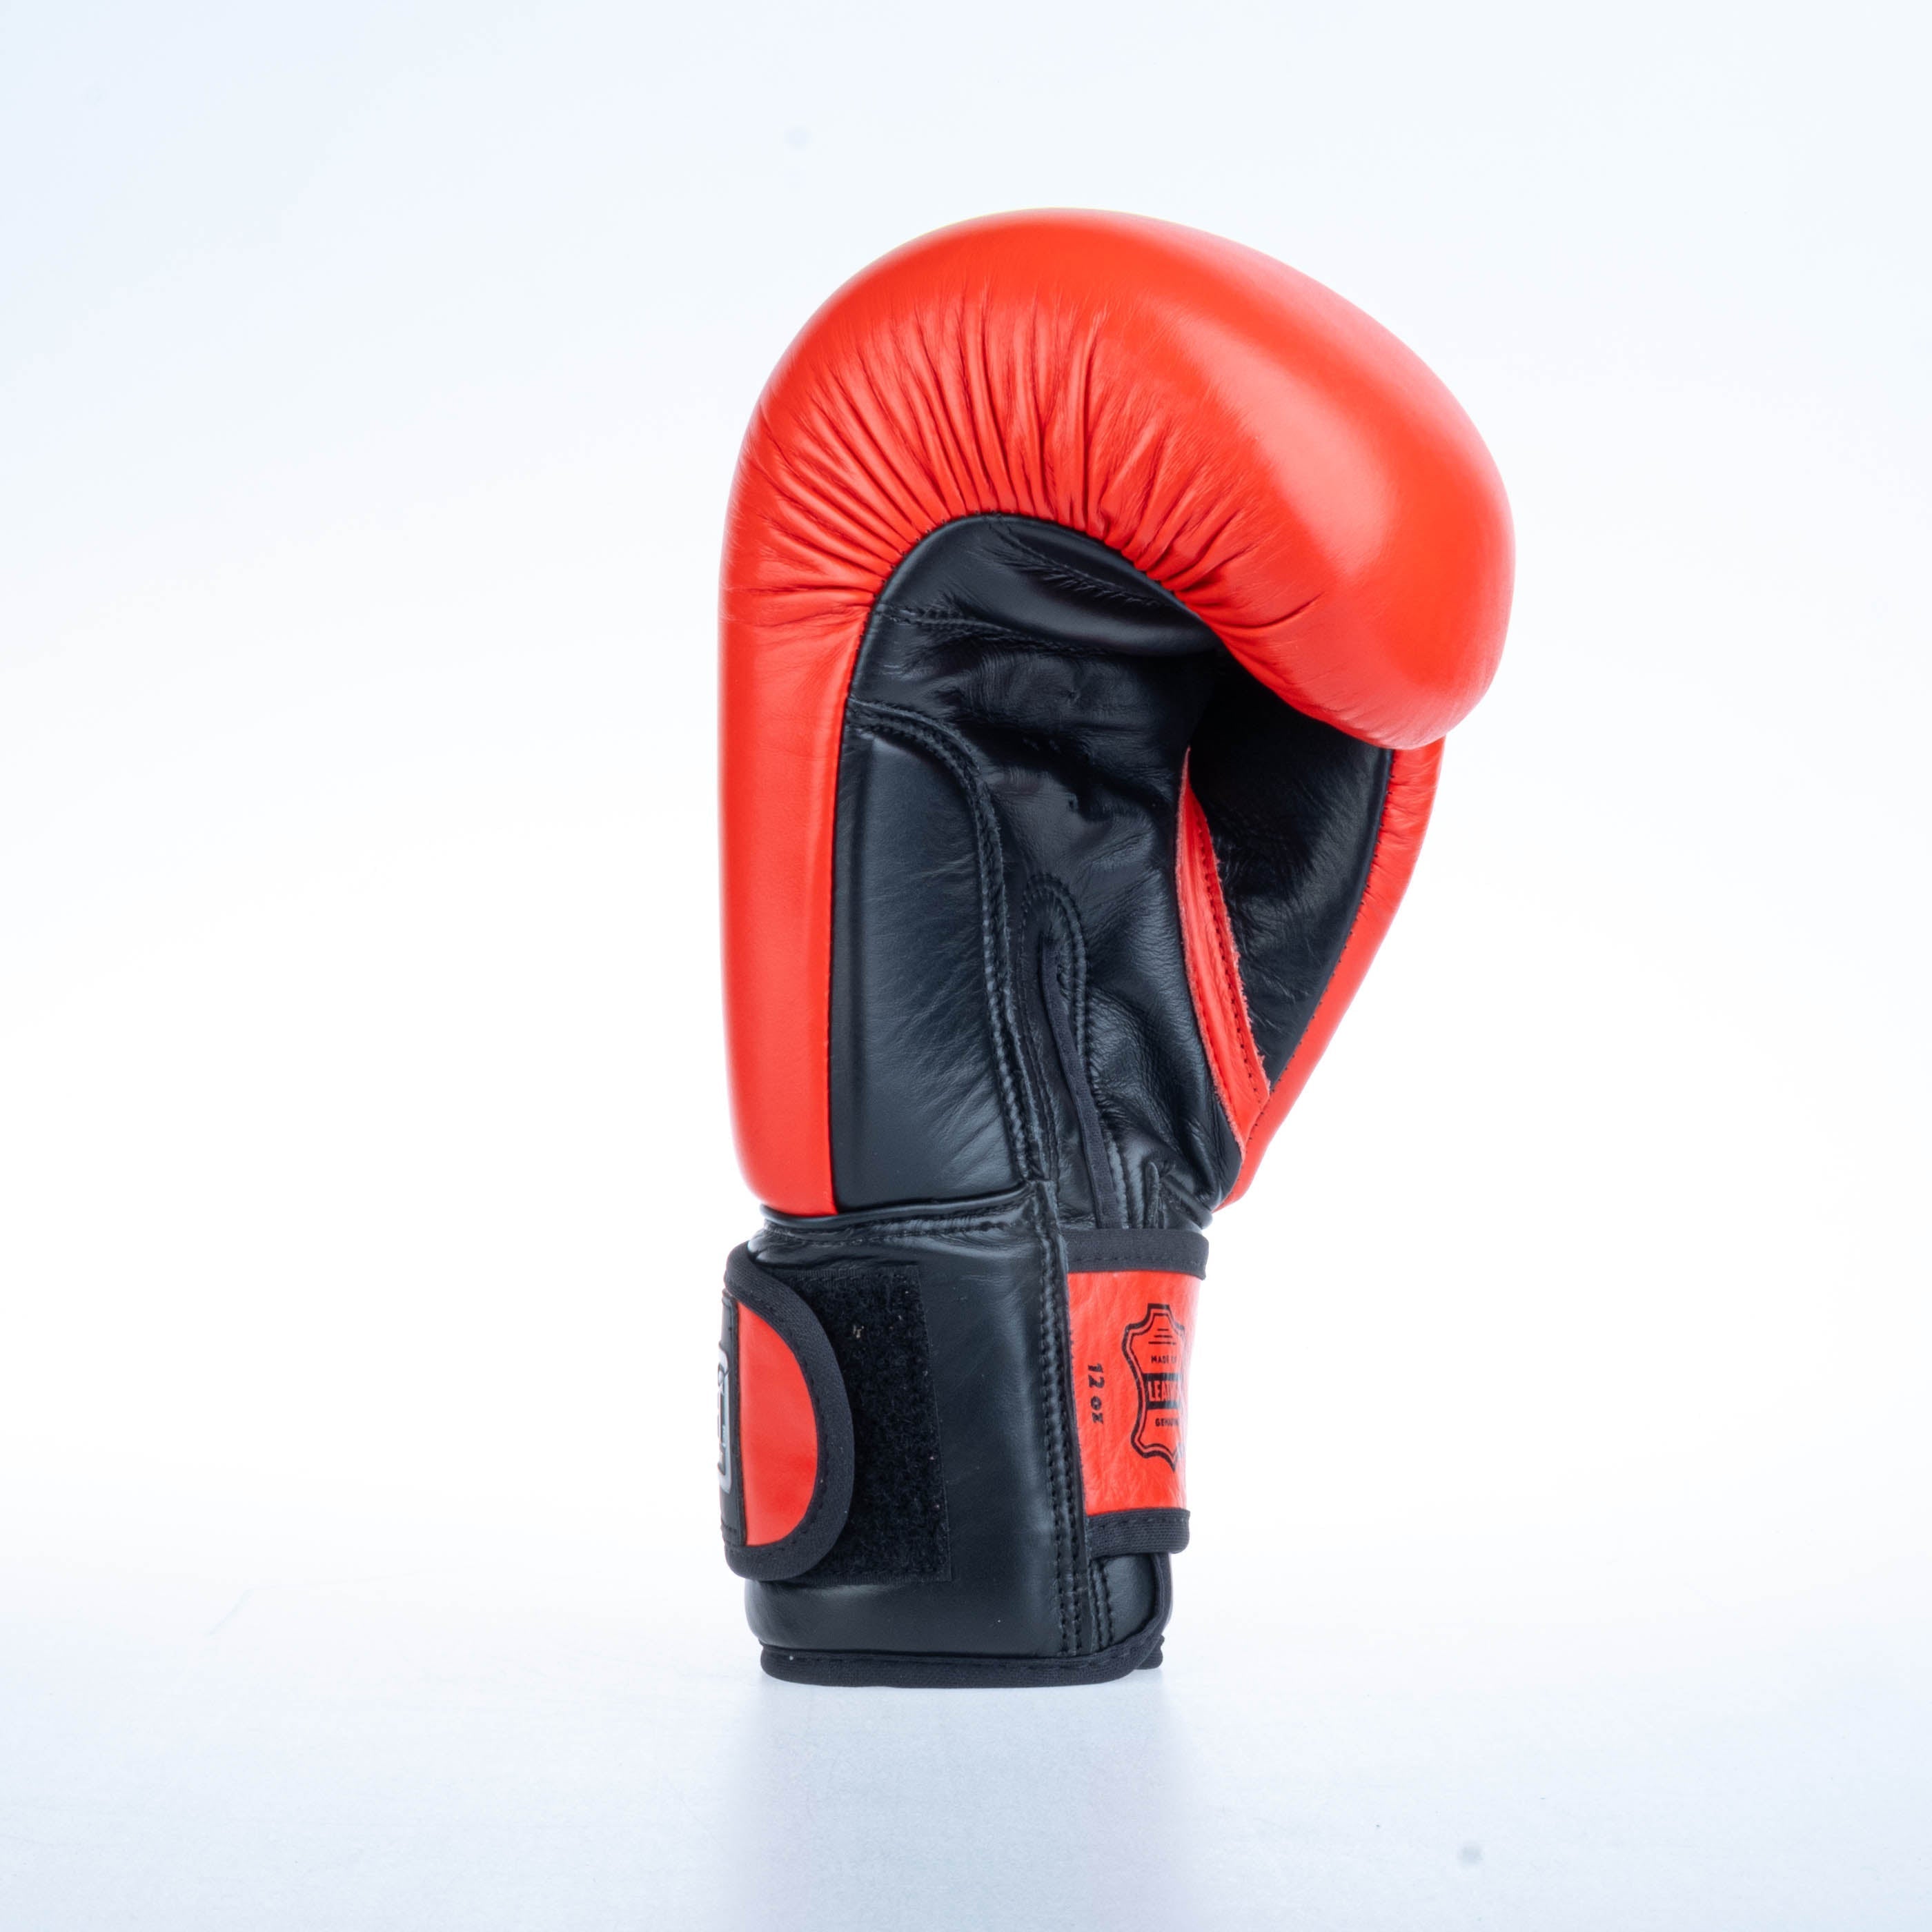 Fighter Boxing Gloves Round - red, 1376-RNDXR